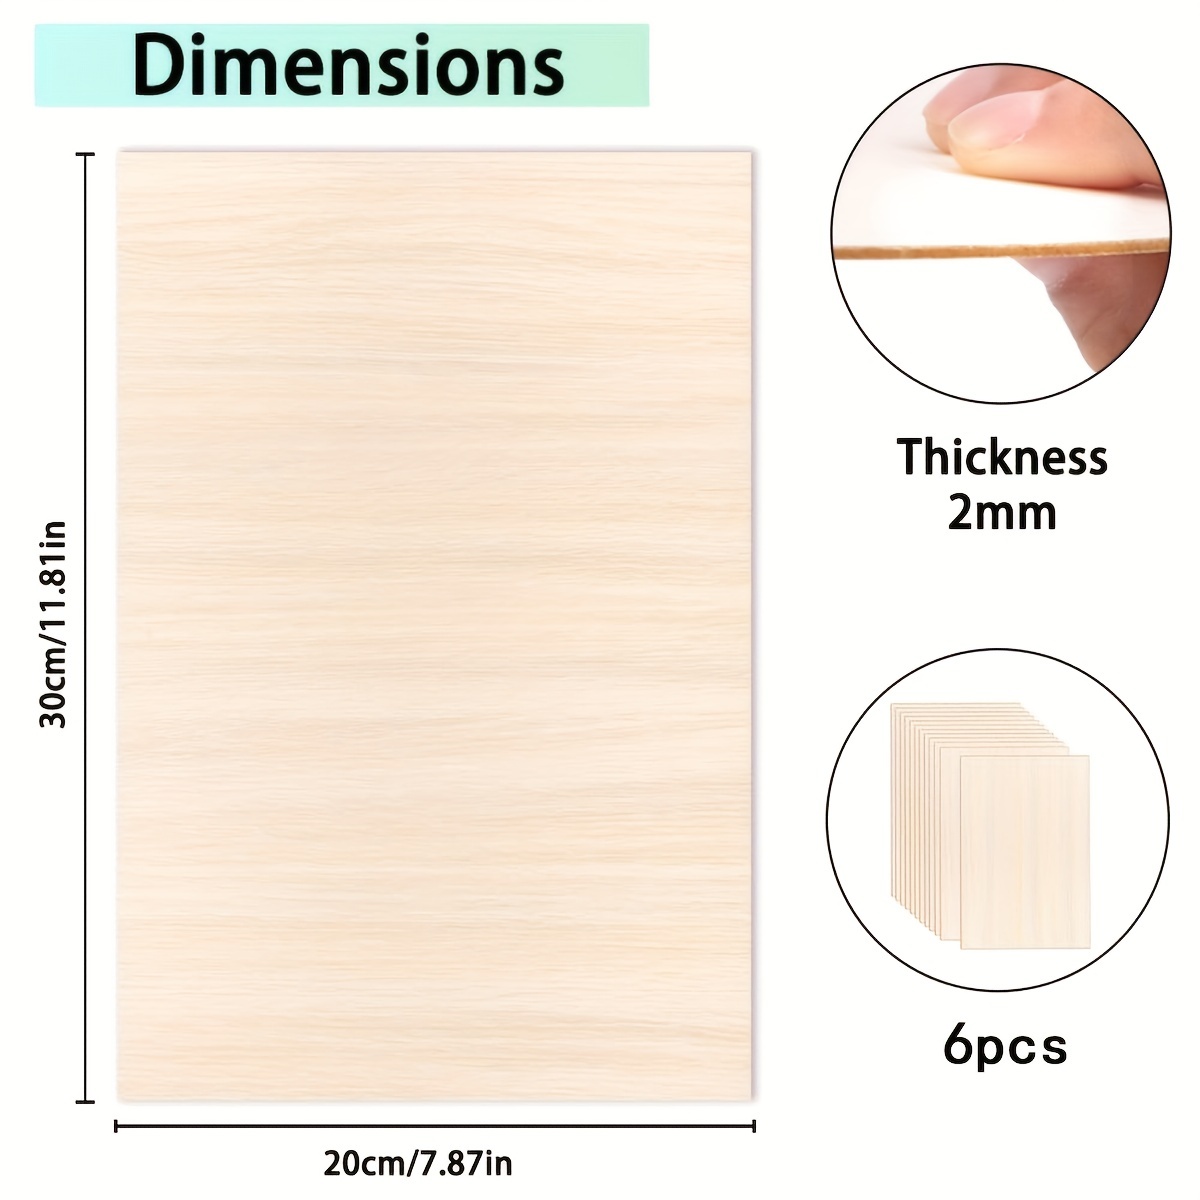 Basswood Sheets ，Unfinished Wood Pieces 20Pcs 6 x 6 x 1/8 Inch，Plywood  Board for Crafts for DIY Projects, Drawing, Painting, Laser, Wood Burning,  Scho for Sale in Queens, NY - OfferUp